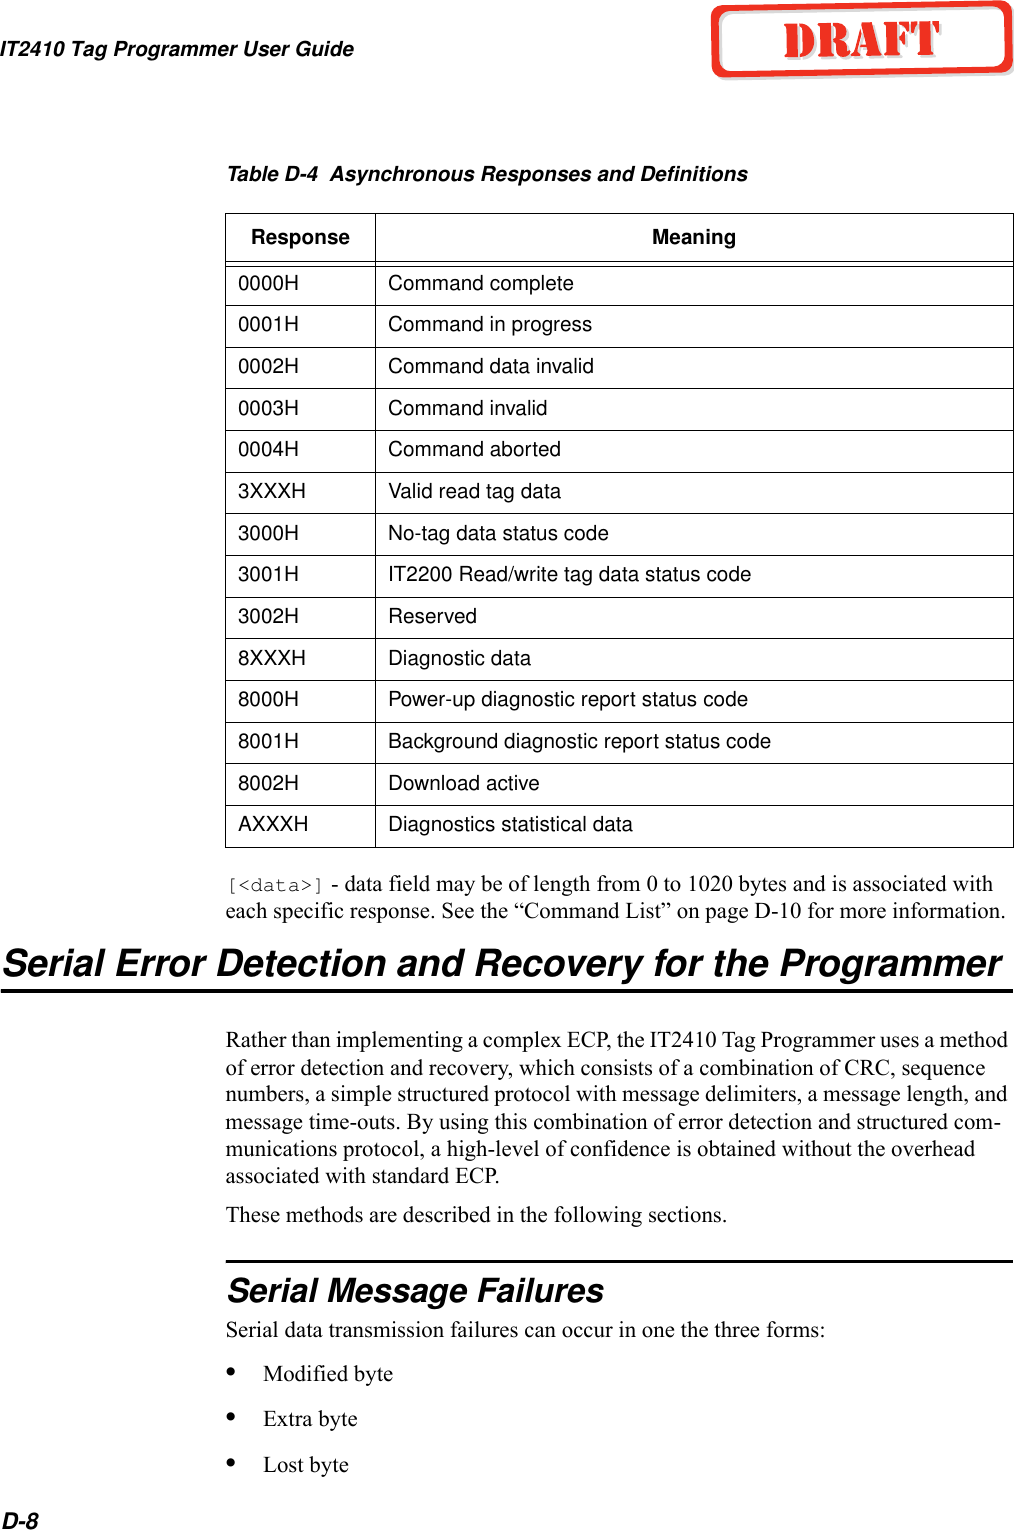 IT2410 Tag Programmer User GuideD-8Table D-4  Asynchronous Responses and Definitions[&lt;data&gt;] - data field may be of length from 0 to 1020 bytes and is associated with each specific response. See the “Command List” on page D-10 for more information.Serial Error Detection and Recovery for the ProgrammerRather than implementing a complex ECP, the IT2410 Tag Programmer uses a method of error detection and recovery, which consists of a combination of CRC, sequence numbers, a simple structured protocol with message delimiters, a message length, and message time-outs. By using this combination of error detection and structured com-munications protocol, a high-level of confidence is obtained without the overhead associated with standard ECP.These methods are described in the following sections.Serial Message FailuresSerial data transmission failures can occur in one the three forms:•Modified byte•Extra byte•Lost byte Response Meaning0000H Command complete0001H Command in progress0002H Command data invalid0003H Command invalid0004H Command aborted3XXXH Valid read tag data3000H No-tag data status code3001H IT2200 Read/write tag data status code3002H Reserved8XXXH Diagnostic data8000H Power-up diagnostic report status code8001H Background diagnostic report status code8002H Download activeAXXXH Diagnostics statistical data